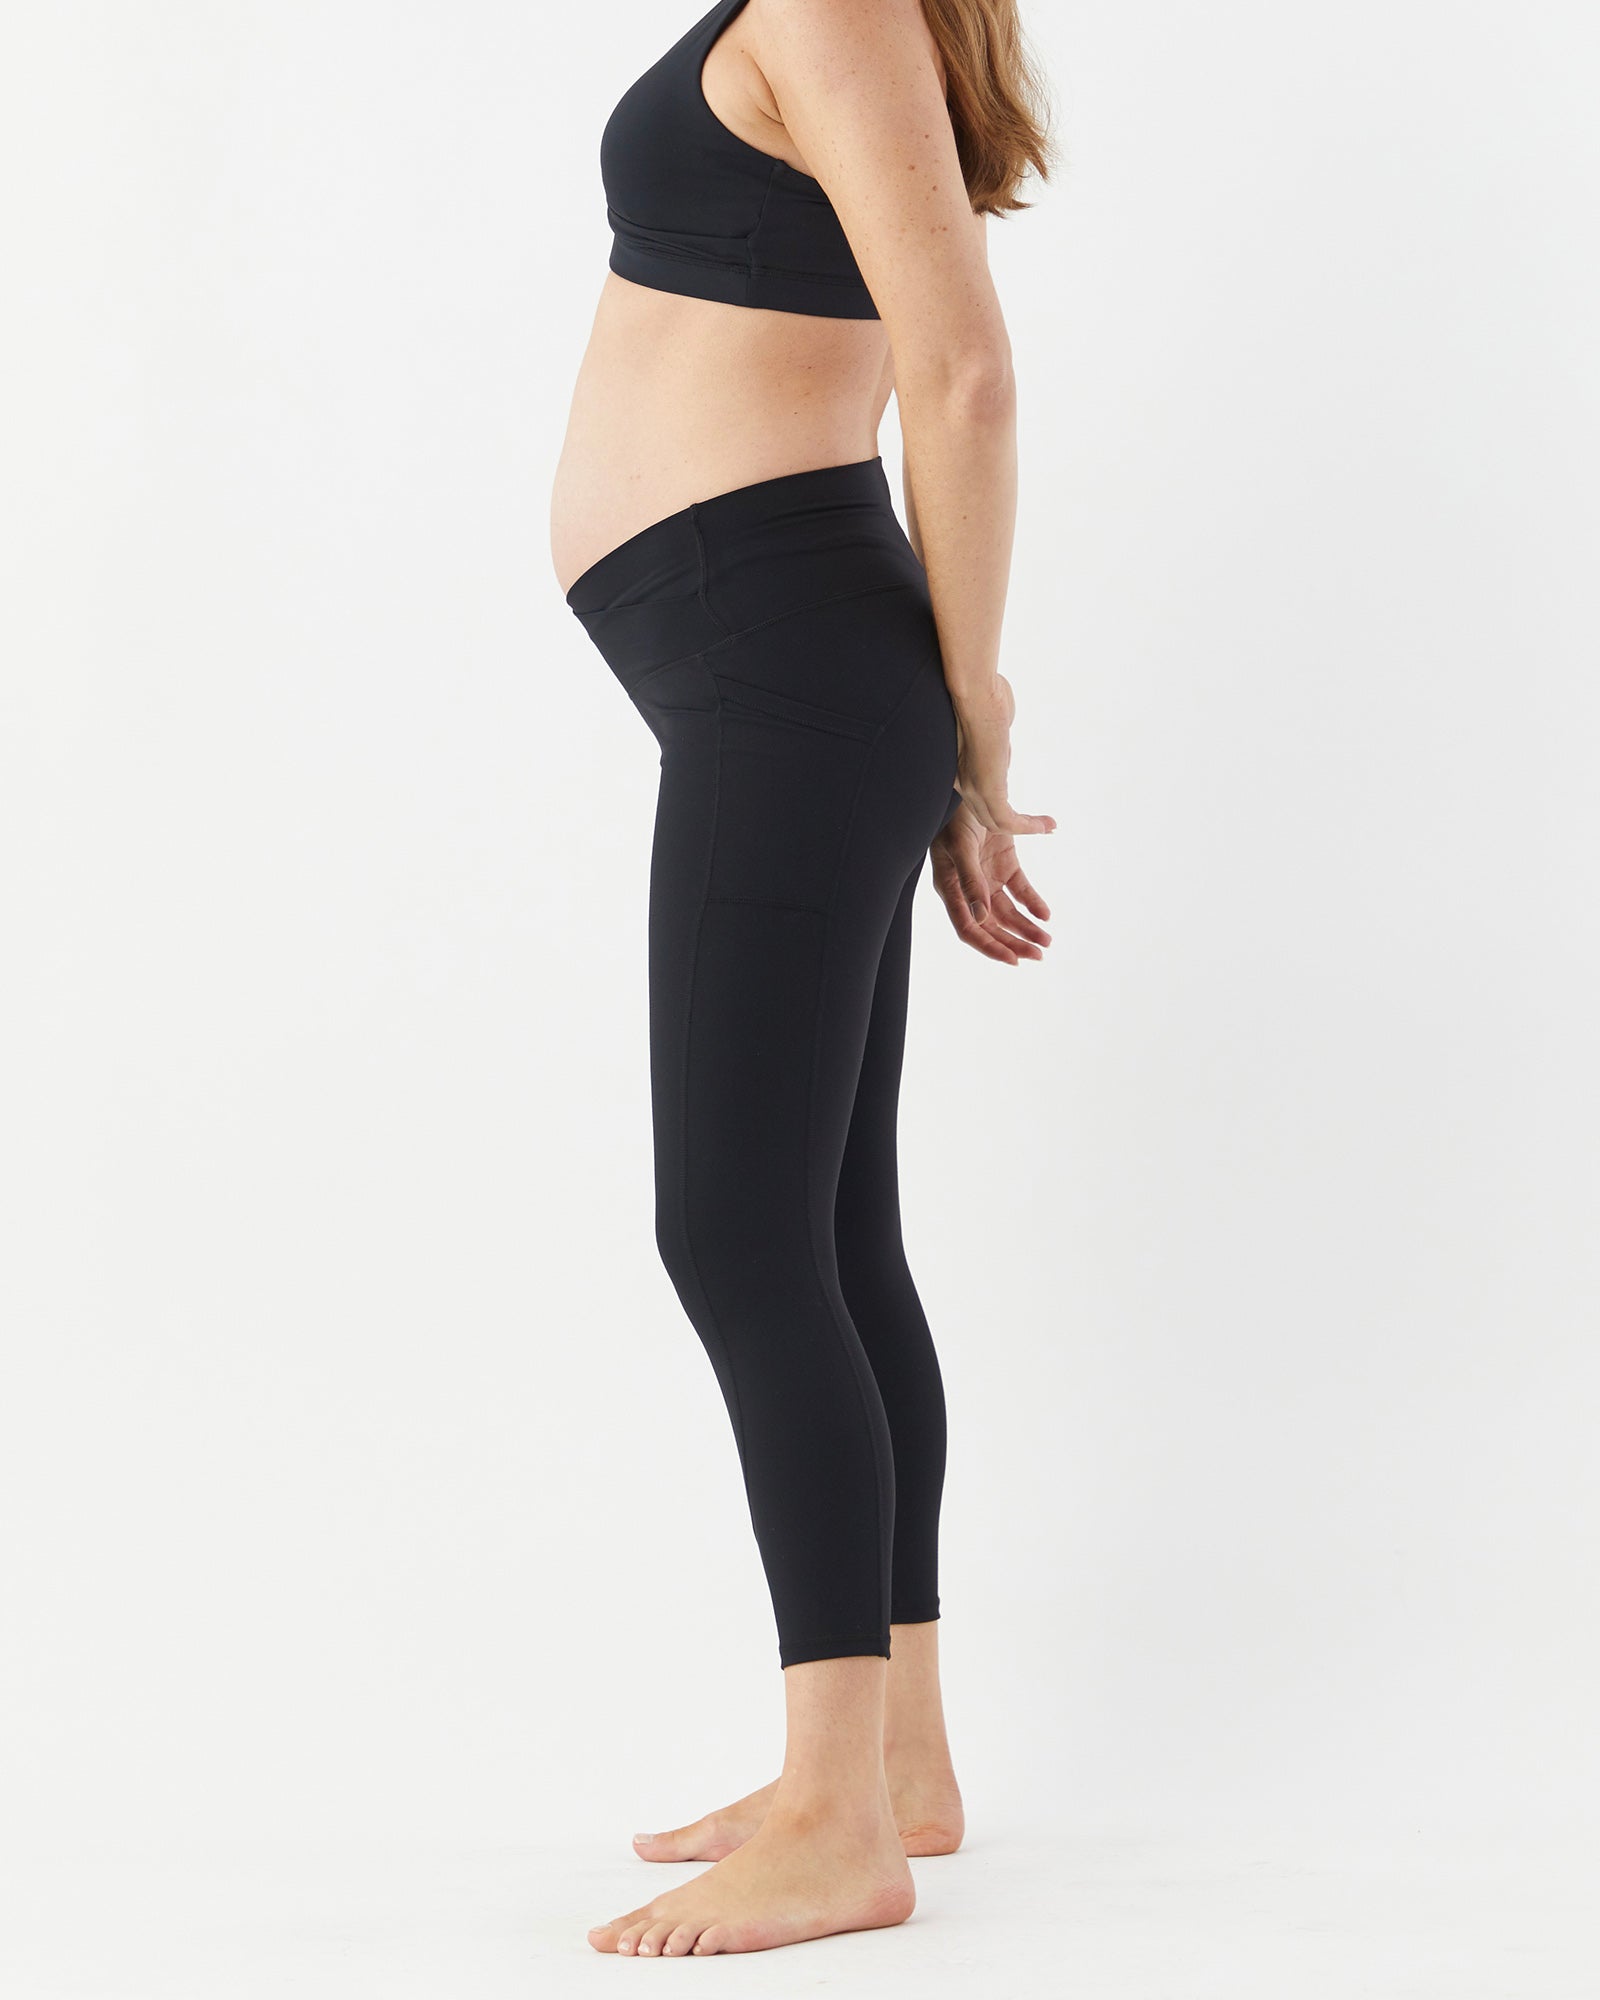 Women's Active Buttery Soft Maternity Leggings. (6 pack) • Wide, high rise  waistband lies flat against your skin • Interior waistband pocket can hold  keys, cards, cash • Ultra buttery soft fabrication •